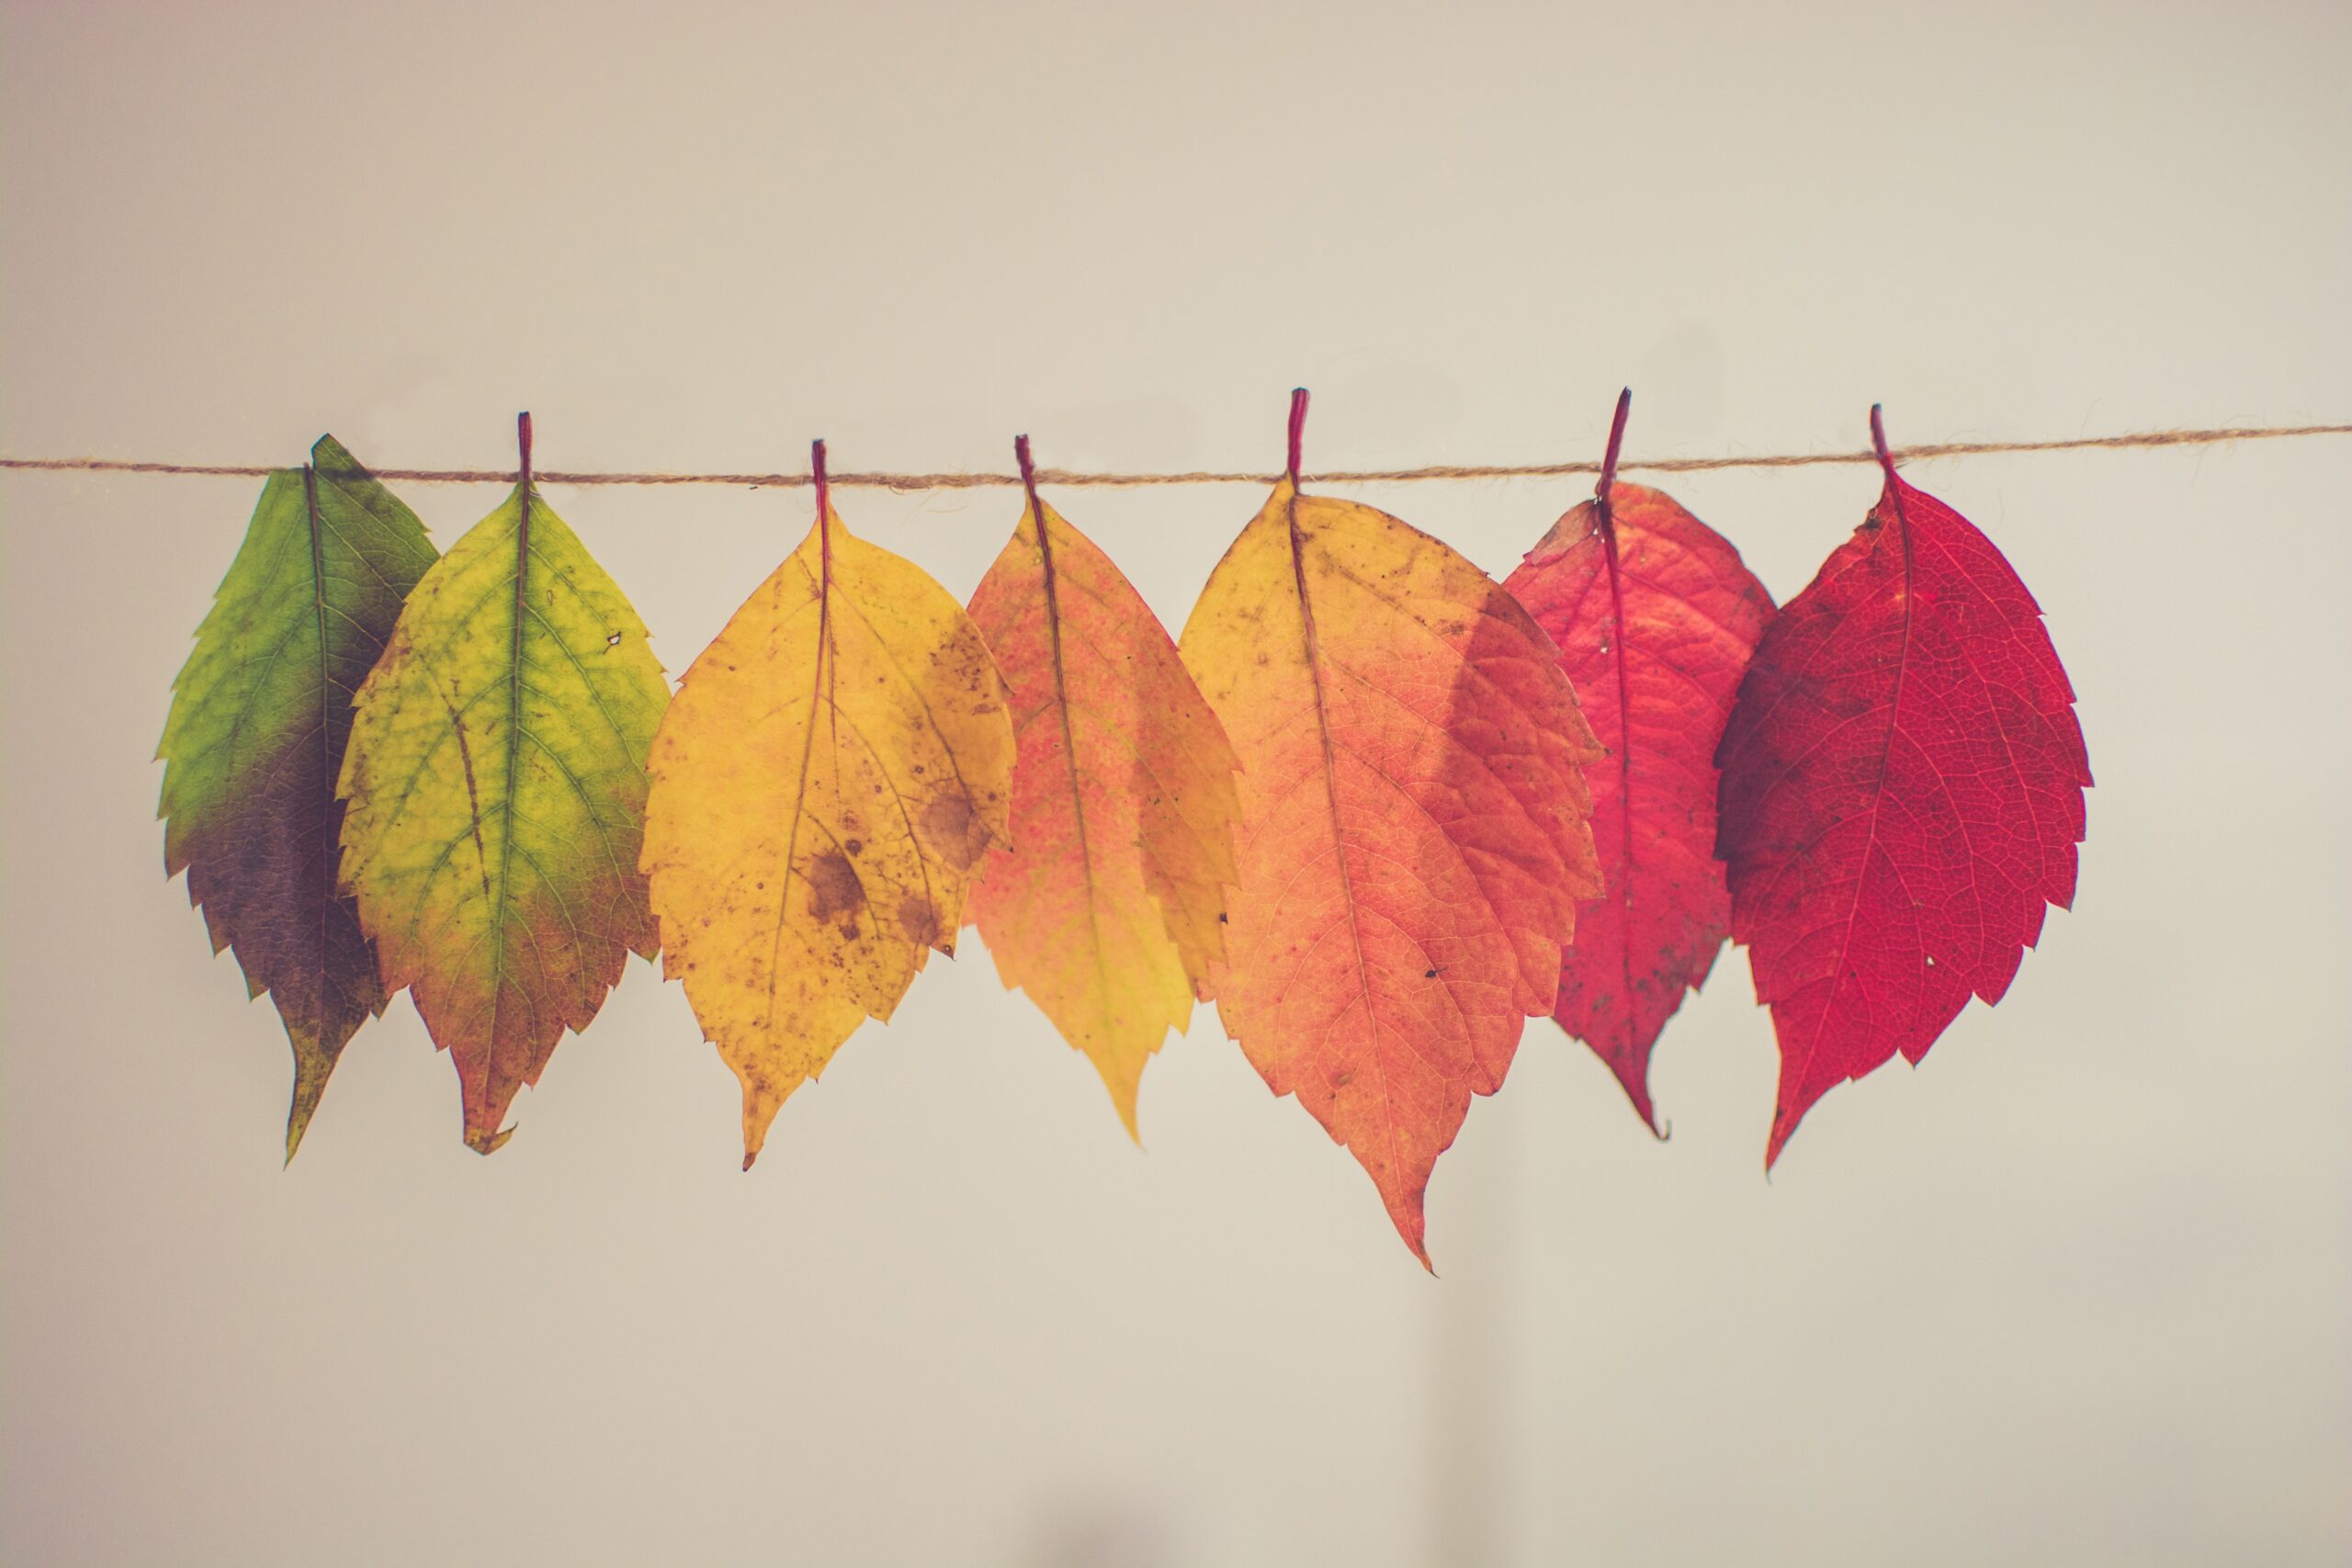 A line of leaves hung on a line, going from a lush green to a faded yellow to orange and gold to red, representing the passing of the seasons through changing leaf colour